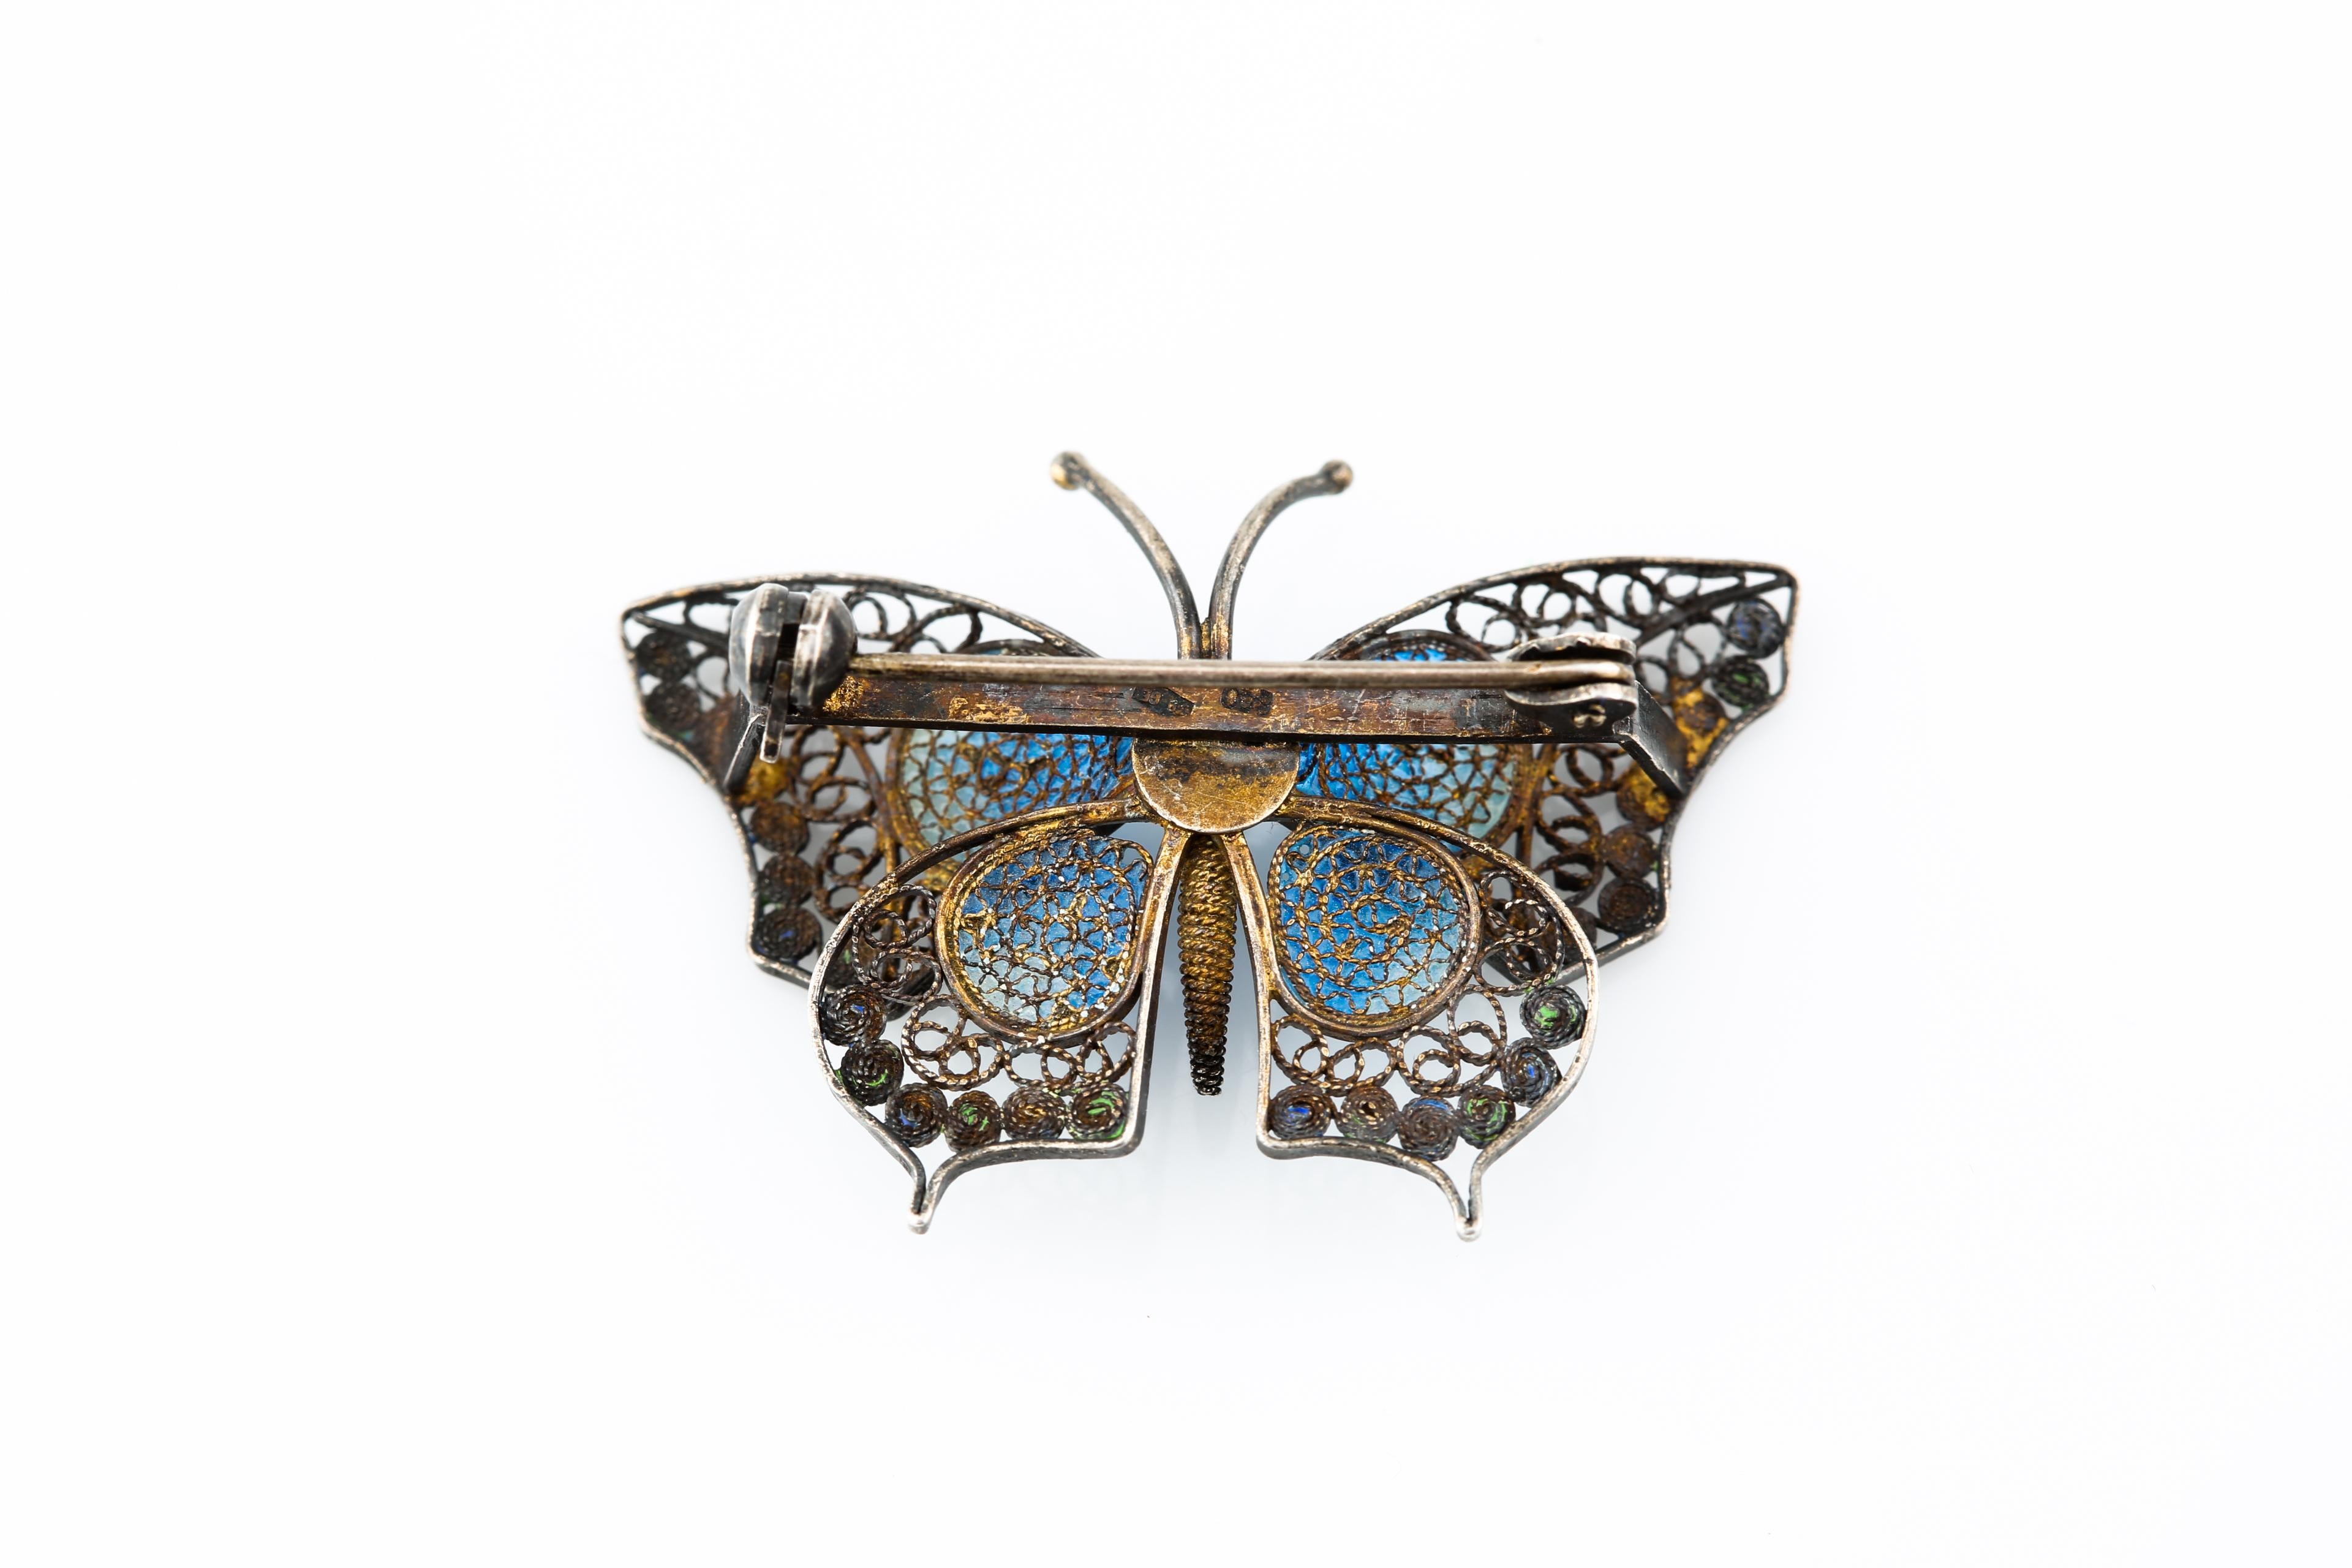 Vintage silver blue, green and white butterfly brooch
Designed by Alioto Adriana of Genova, Italy
Hallmarks: 